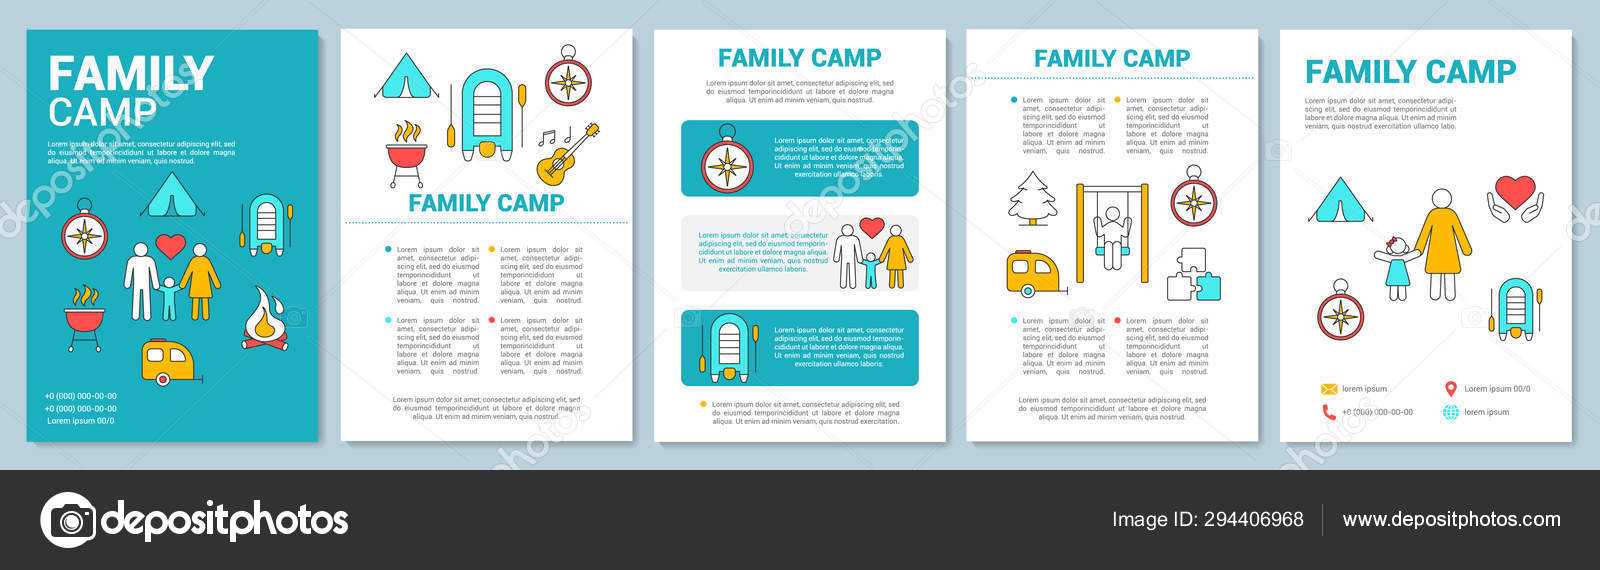 Parents And Children Country Camp Brochure Template Layout In Country Brochure Template